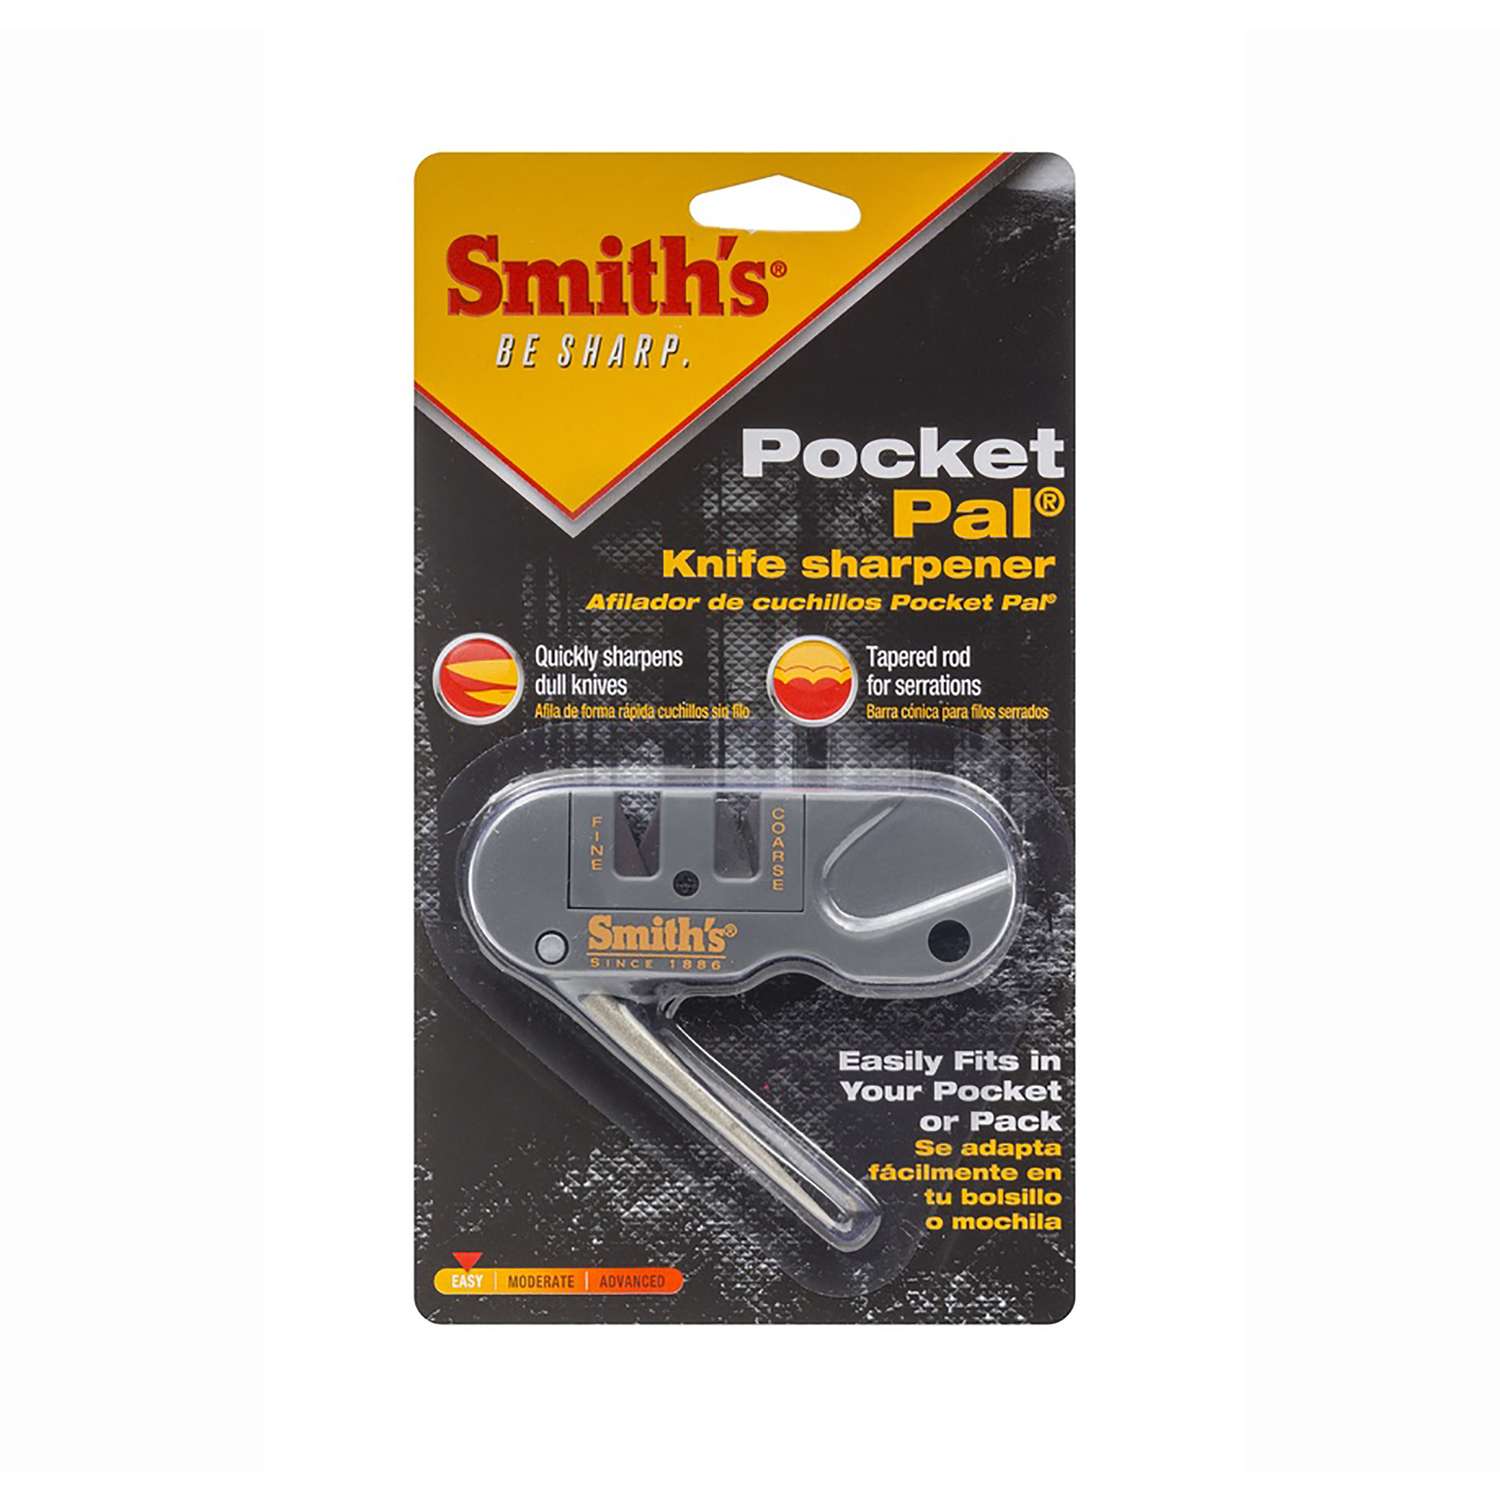 Smith's Pocket Pal X2 Sharpener And Survival Tool